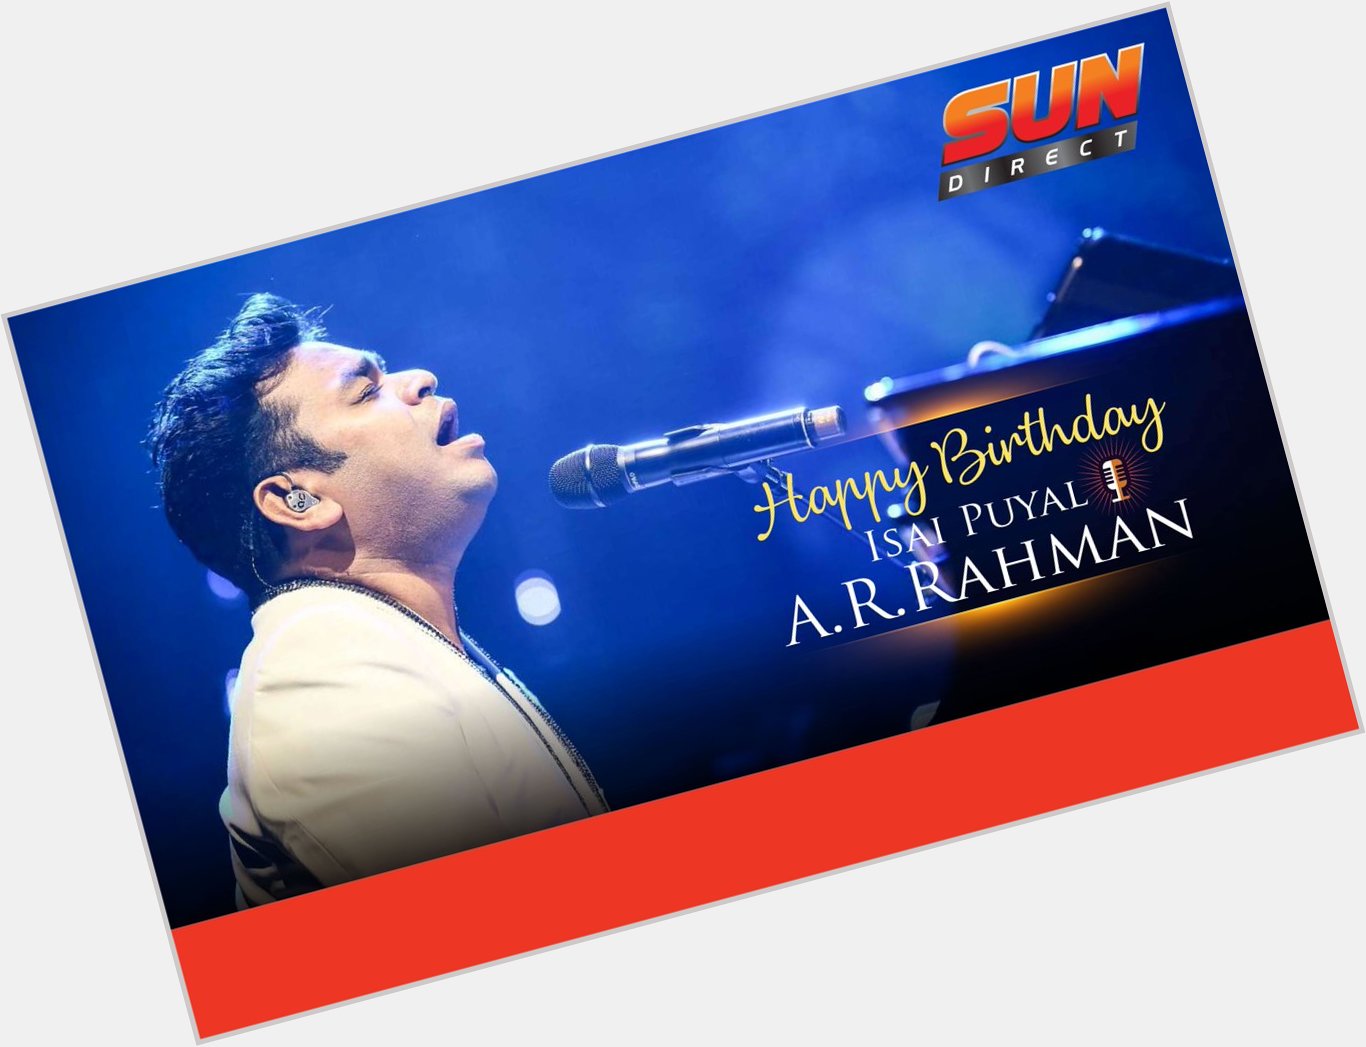 To the legend, the musical maestro. Here\s wishing A.R.Rahman,  a very Happy birthday. 